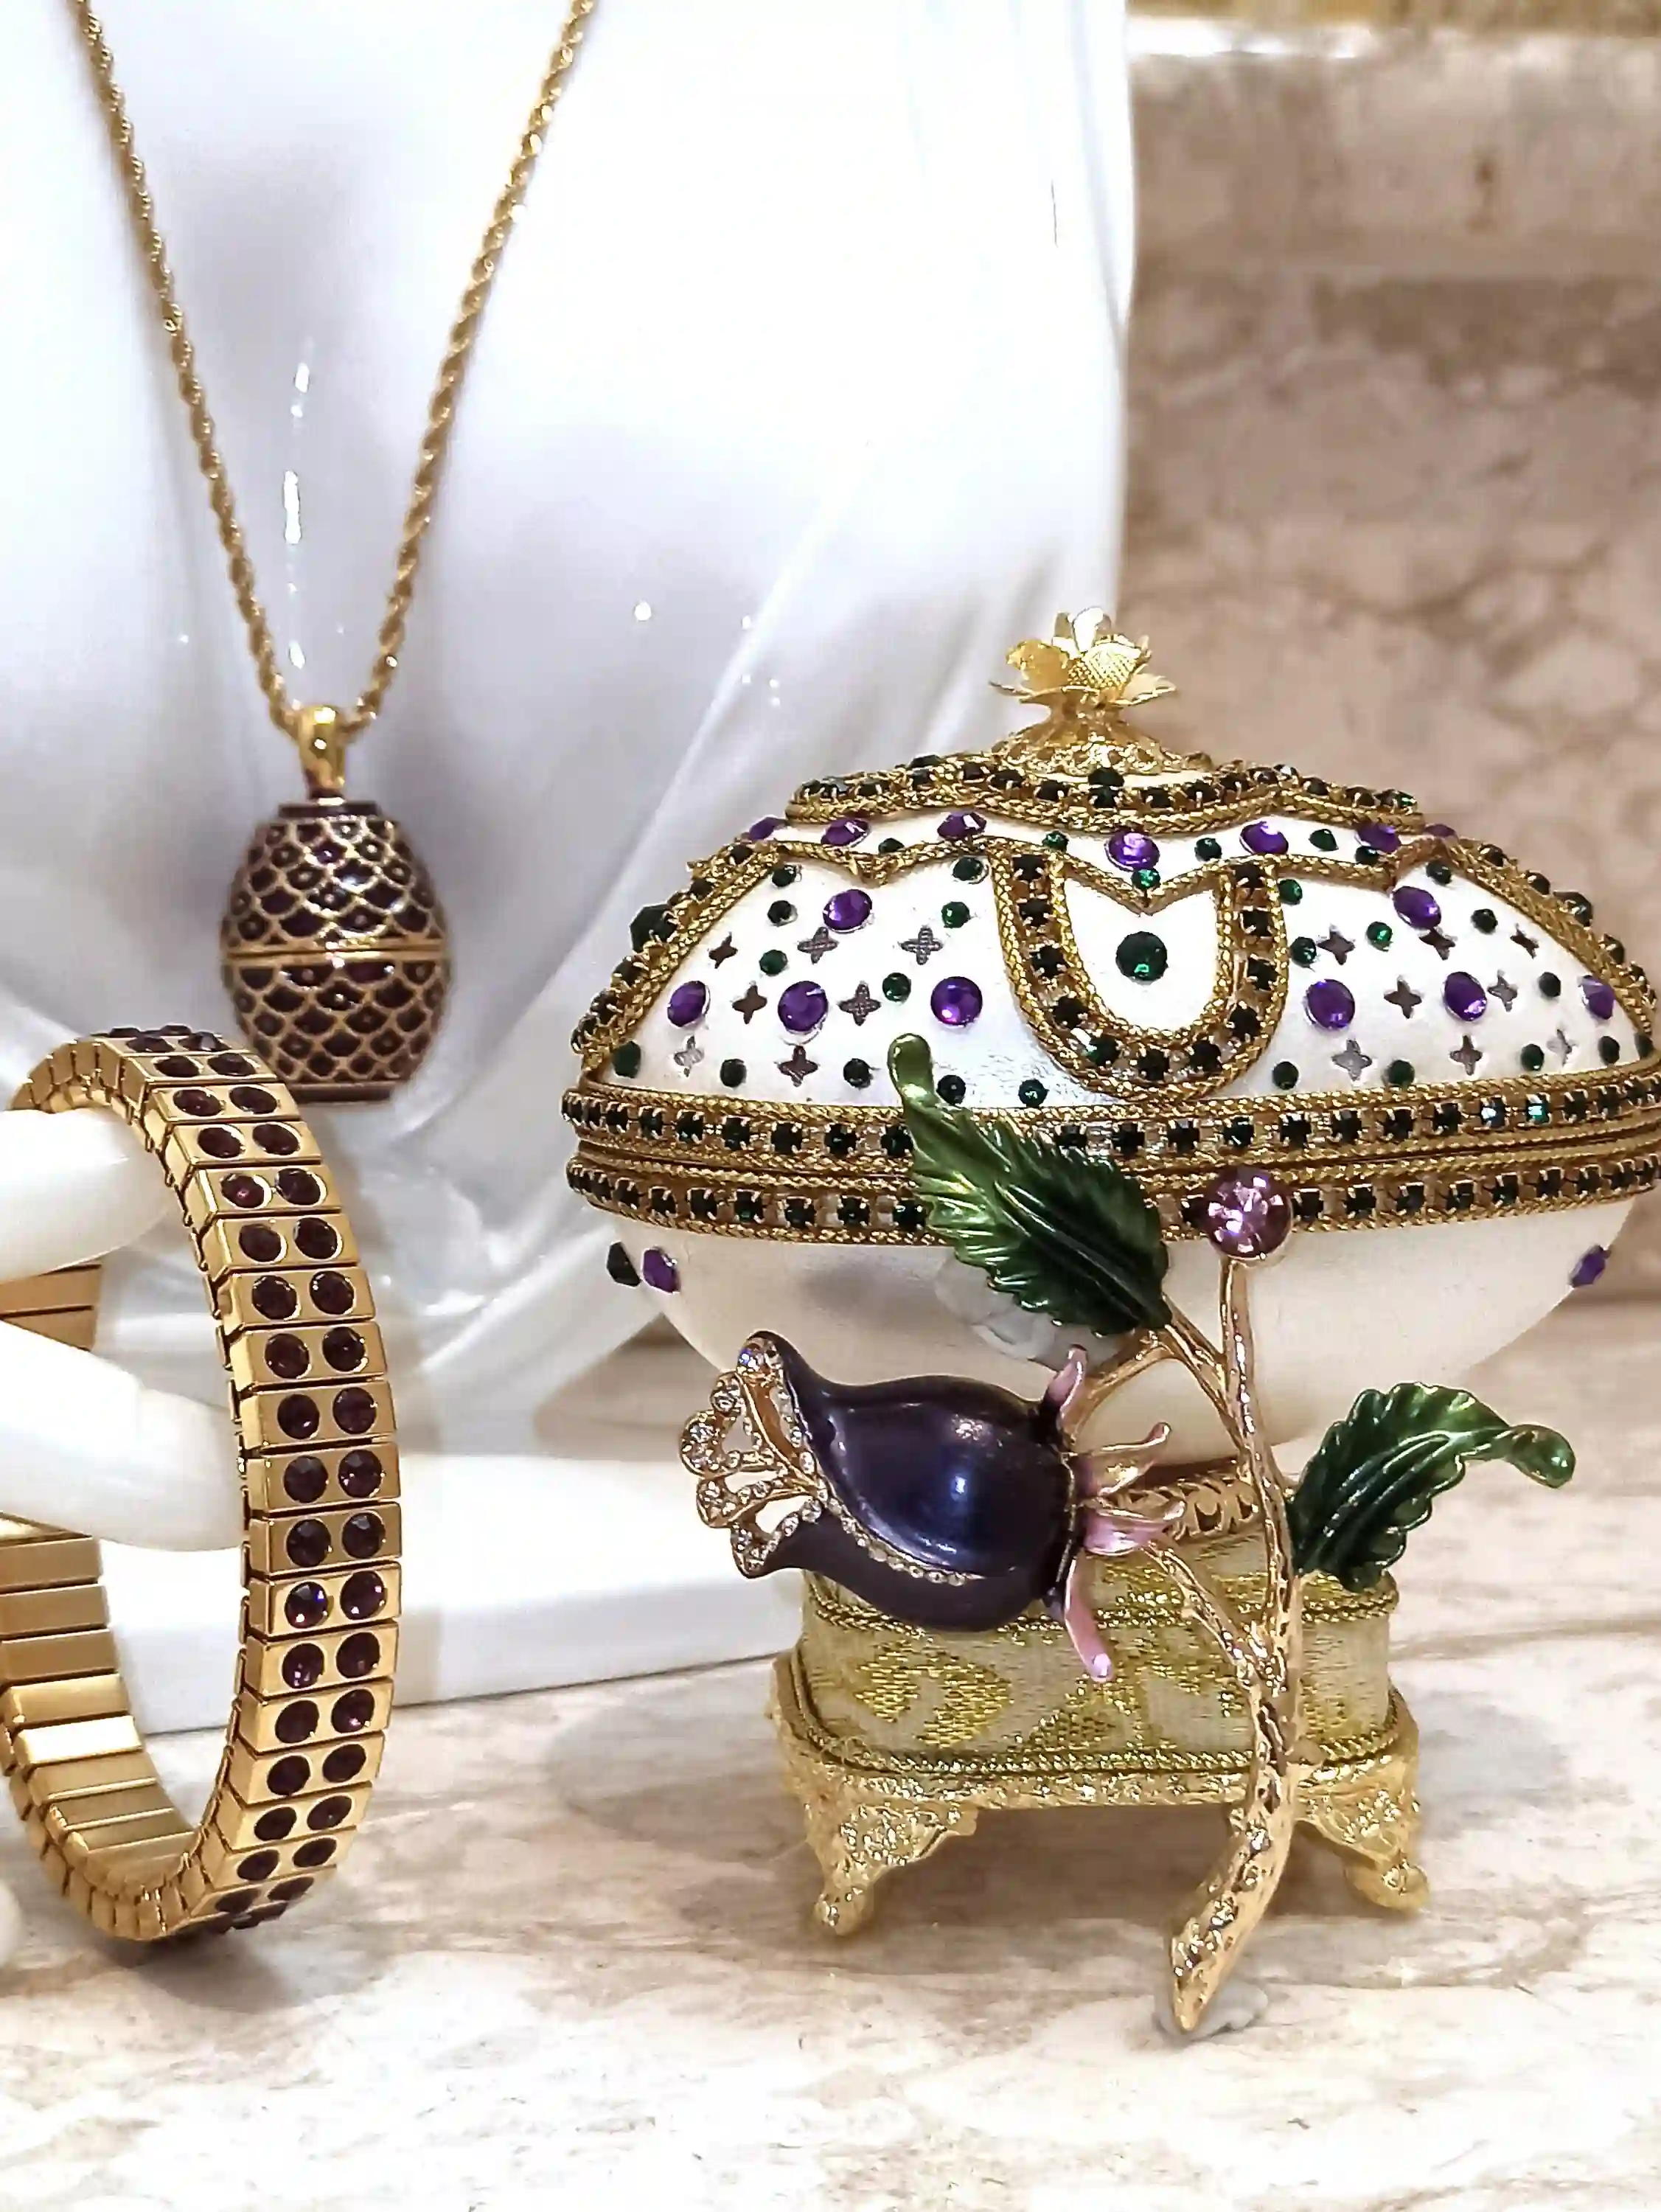 One of a Kind Unique gifts for her- Faberge style EGG - Faberge Egg PENDANT - AMETHYST Bracelet -Statement Jewelry- Mother of the groom gift 